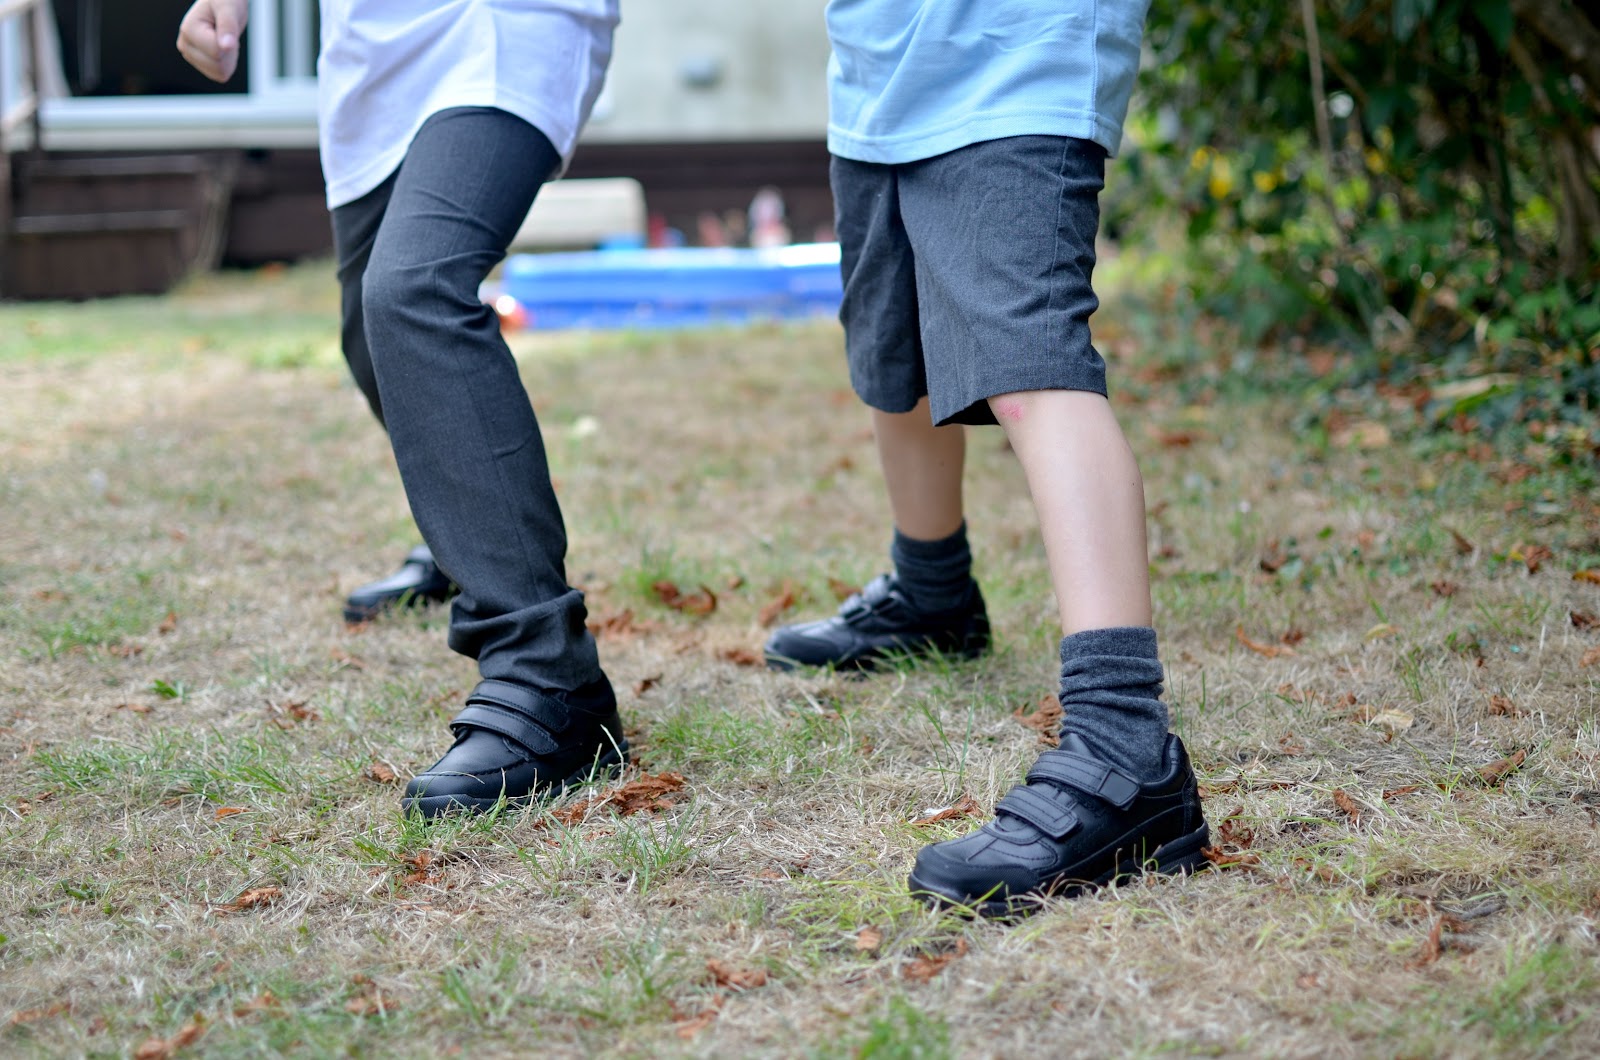 Machu Picchu Dempsey Ideelt The Adventure of Parenthood: Back to School with Deichmann Shoes